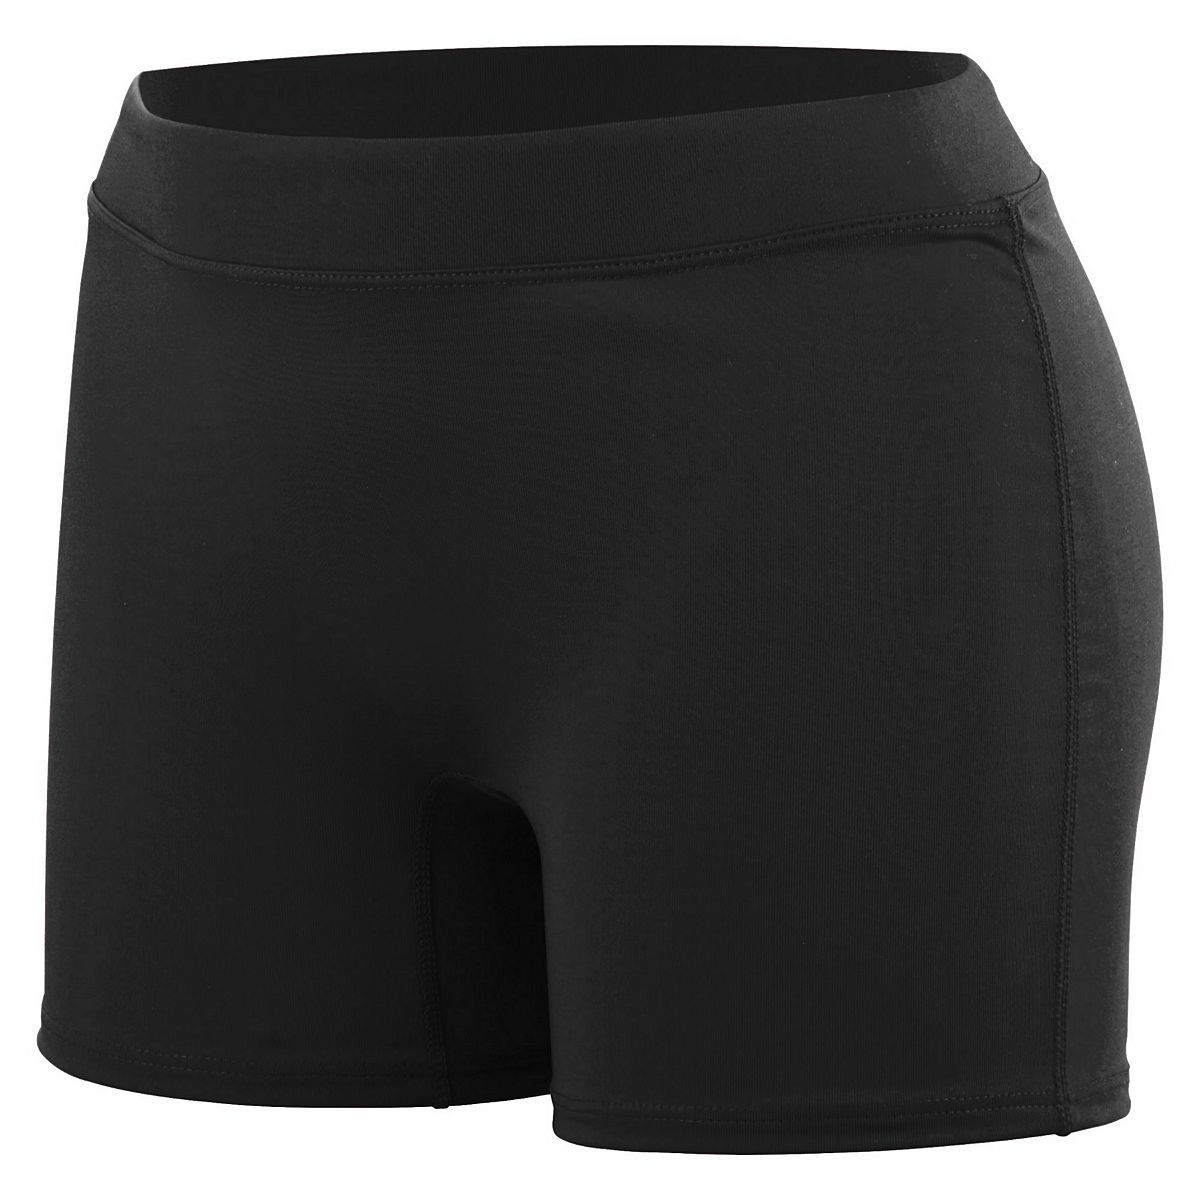 High 5 Ladies Knock Out Shorts in Black  -Part of the Ladies, Ladies-Shorts, High5-Products, Volleyball product lines at KanaleyCreations.com